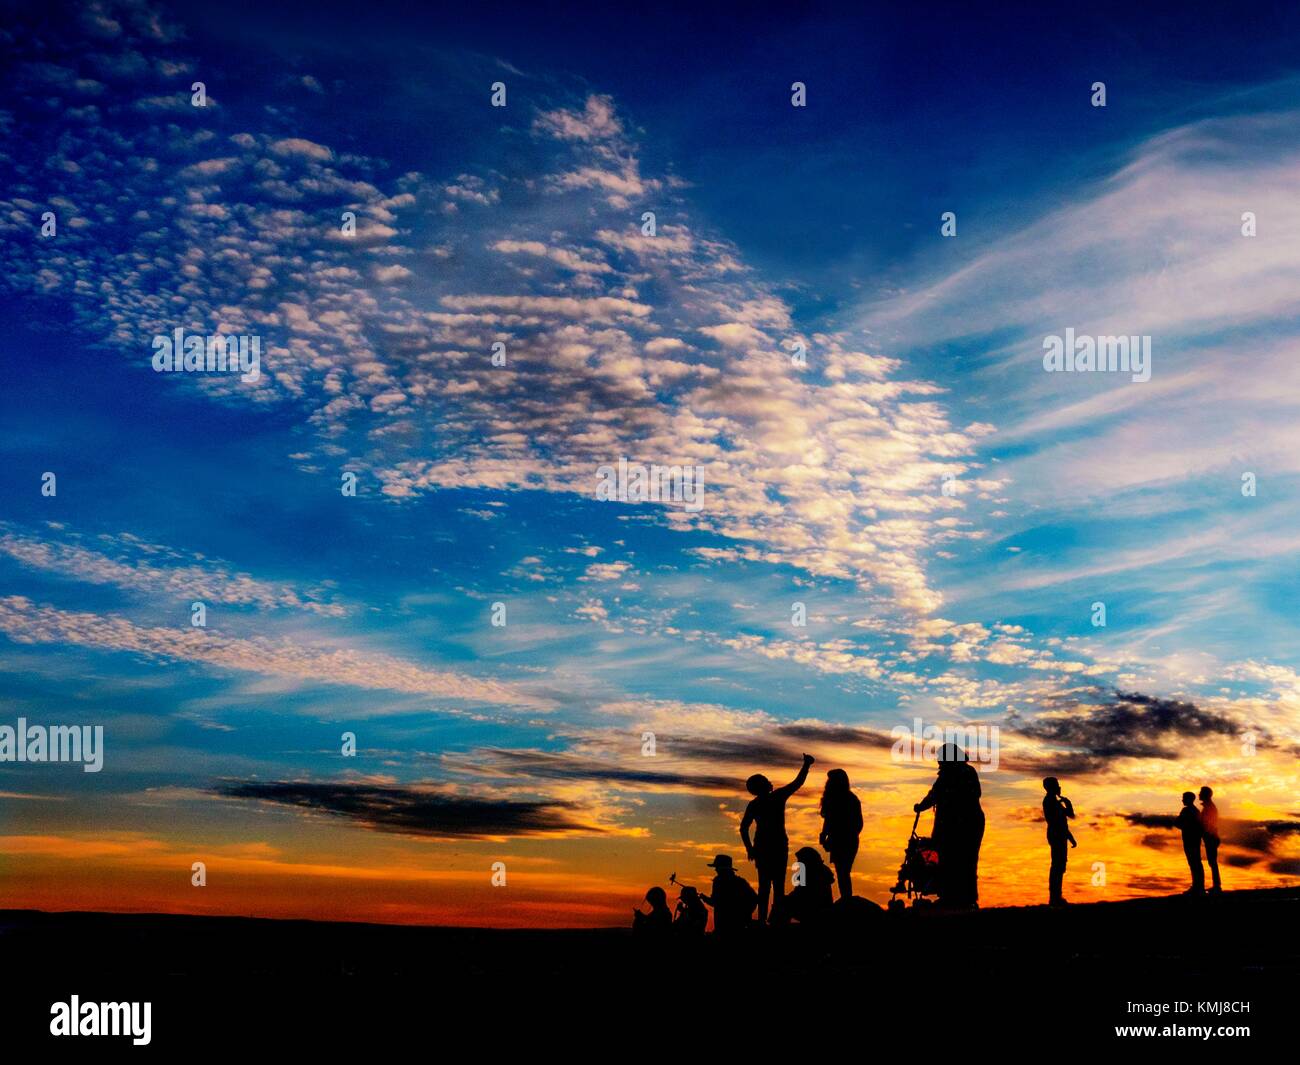 Silhouettes at sunset. Morocco Stock Photo